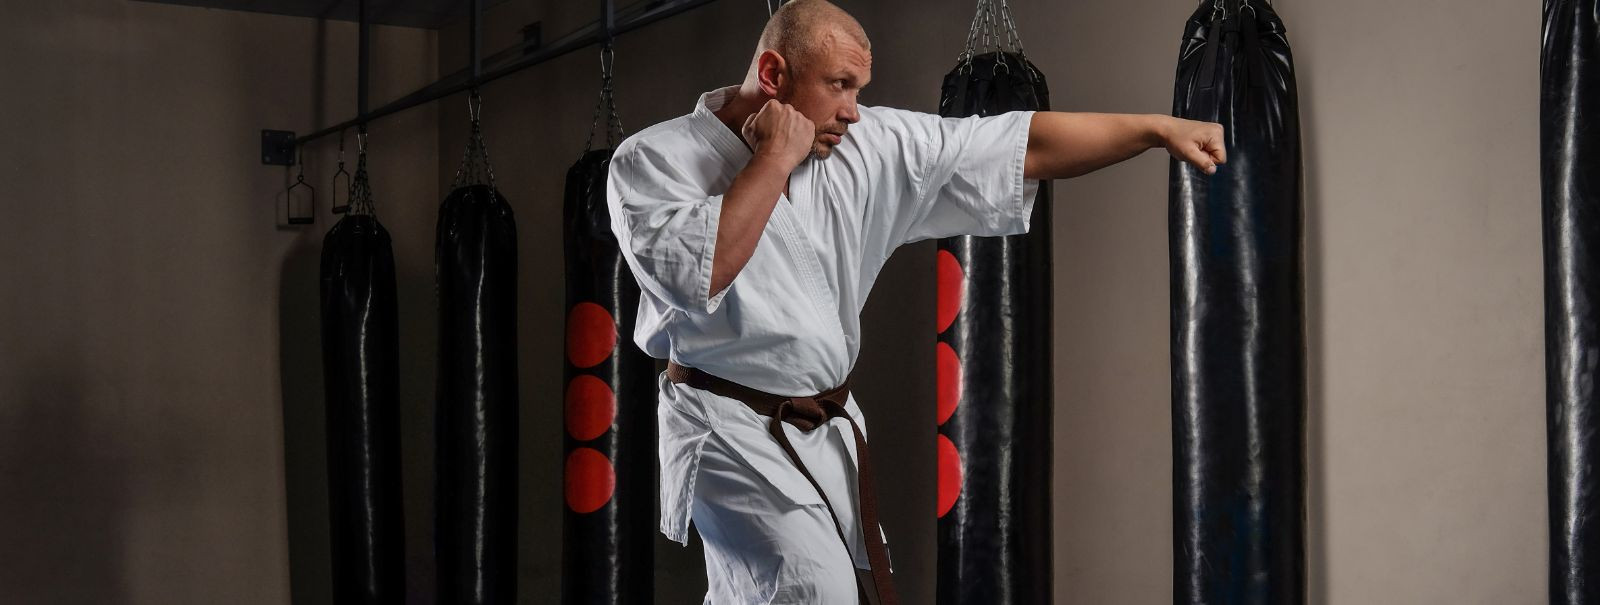 The journey of martial arts is as much about cultivating the spirit and mind as it is about honing the body's capabilities. The philosophy behind martial arts i